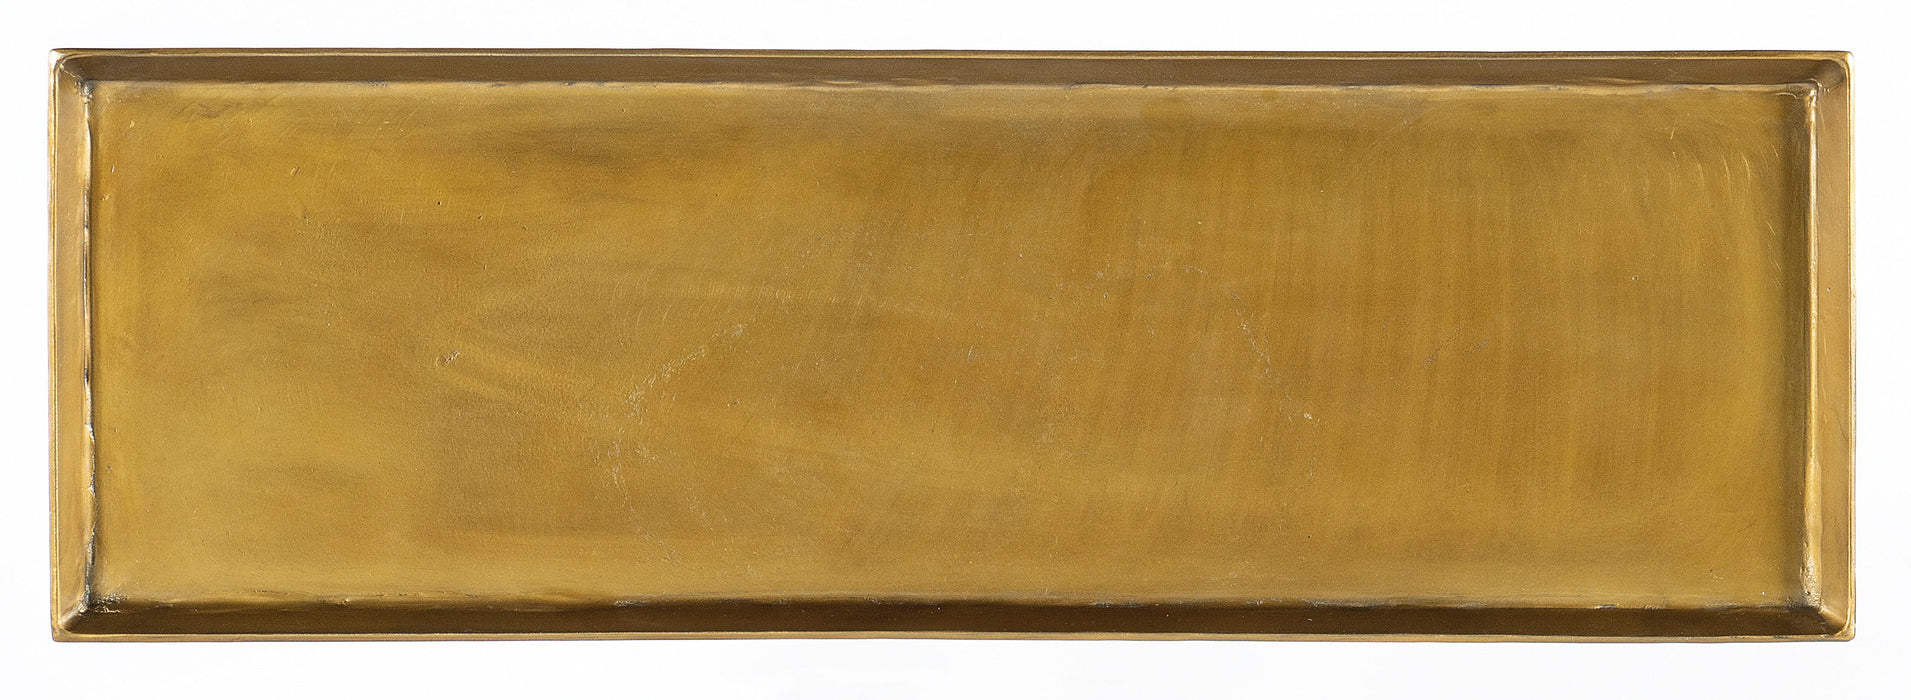 Commerce And Market - Tray Top Metal Console